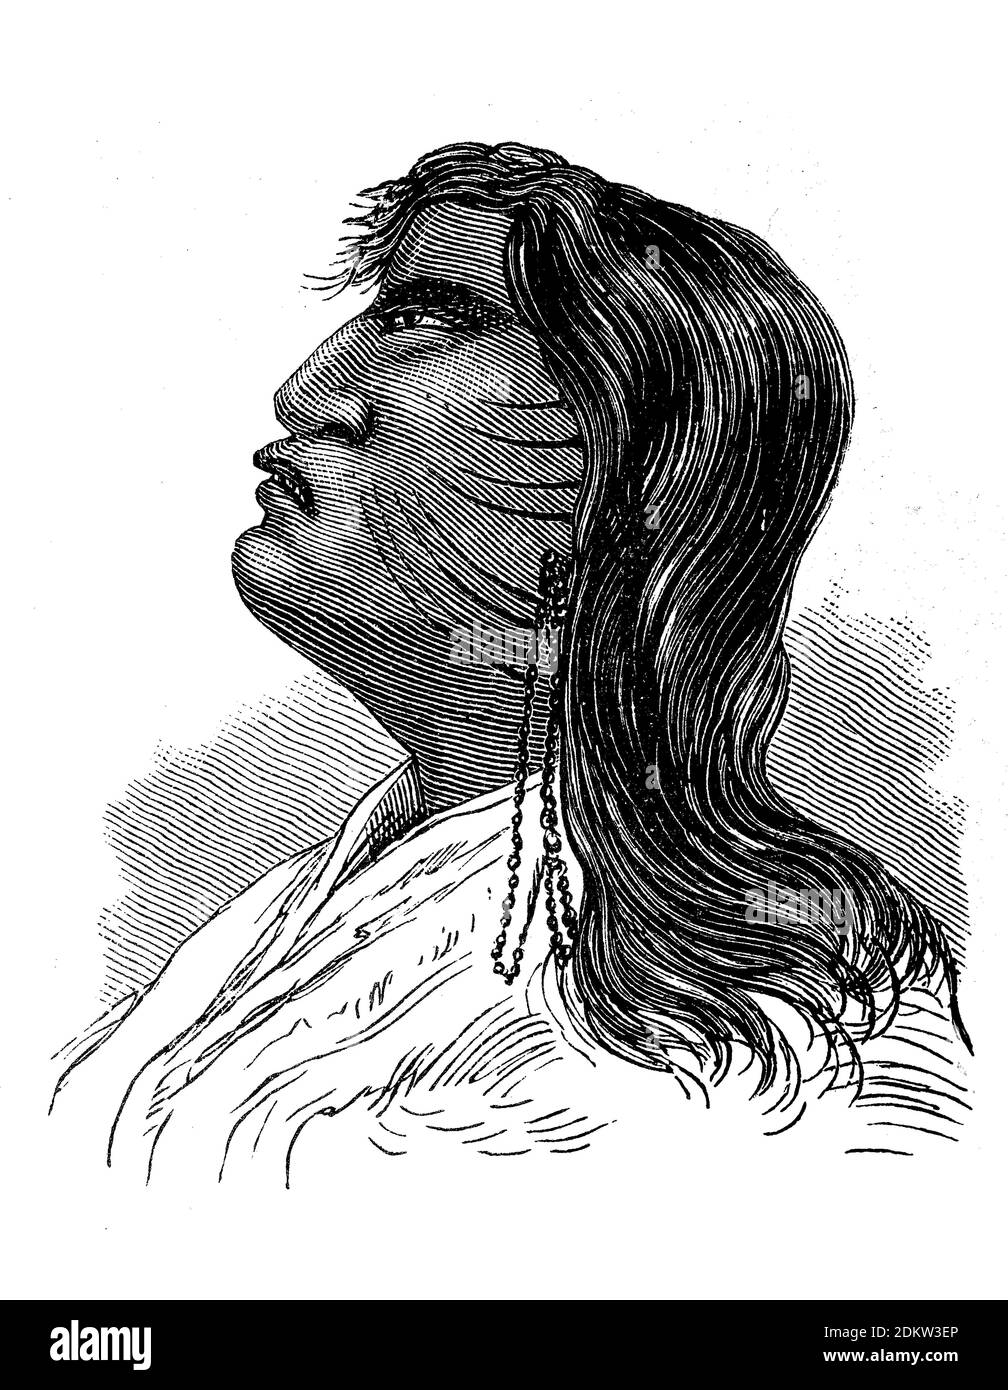 Indian, here a man from the Anti tribe, America, illustration from 1880  /  Indianer, hier ein Mann aus dem Stamm der Anti, Amerika, Illustration aus 1880, Historisch, historical, digital improved reproduction of an original from the 19th century / digitale Reproduktion einer Originalvorlage aus dem 19. Jahrhundert Stock Photo